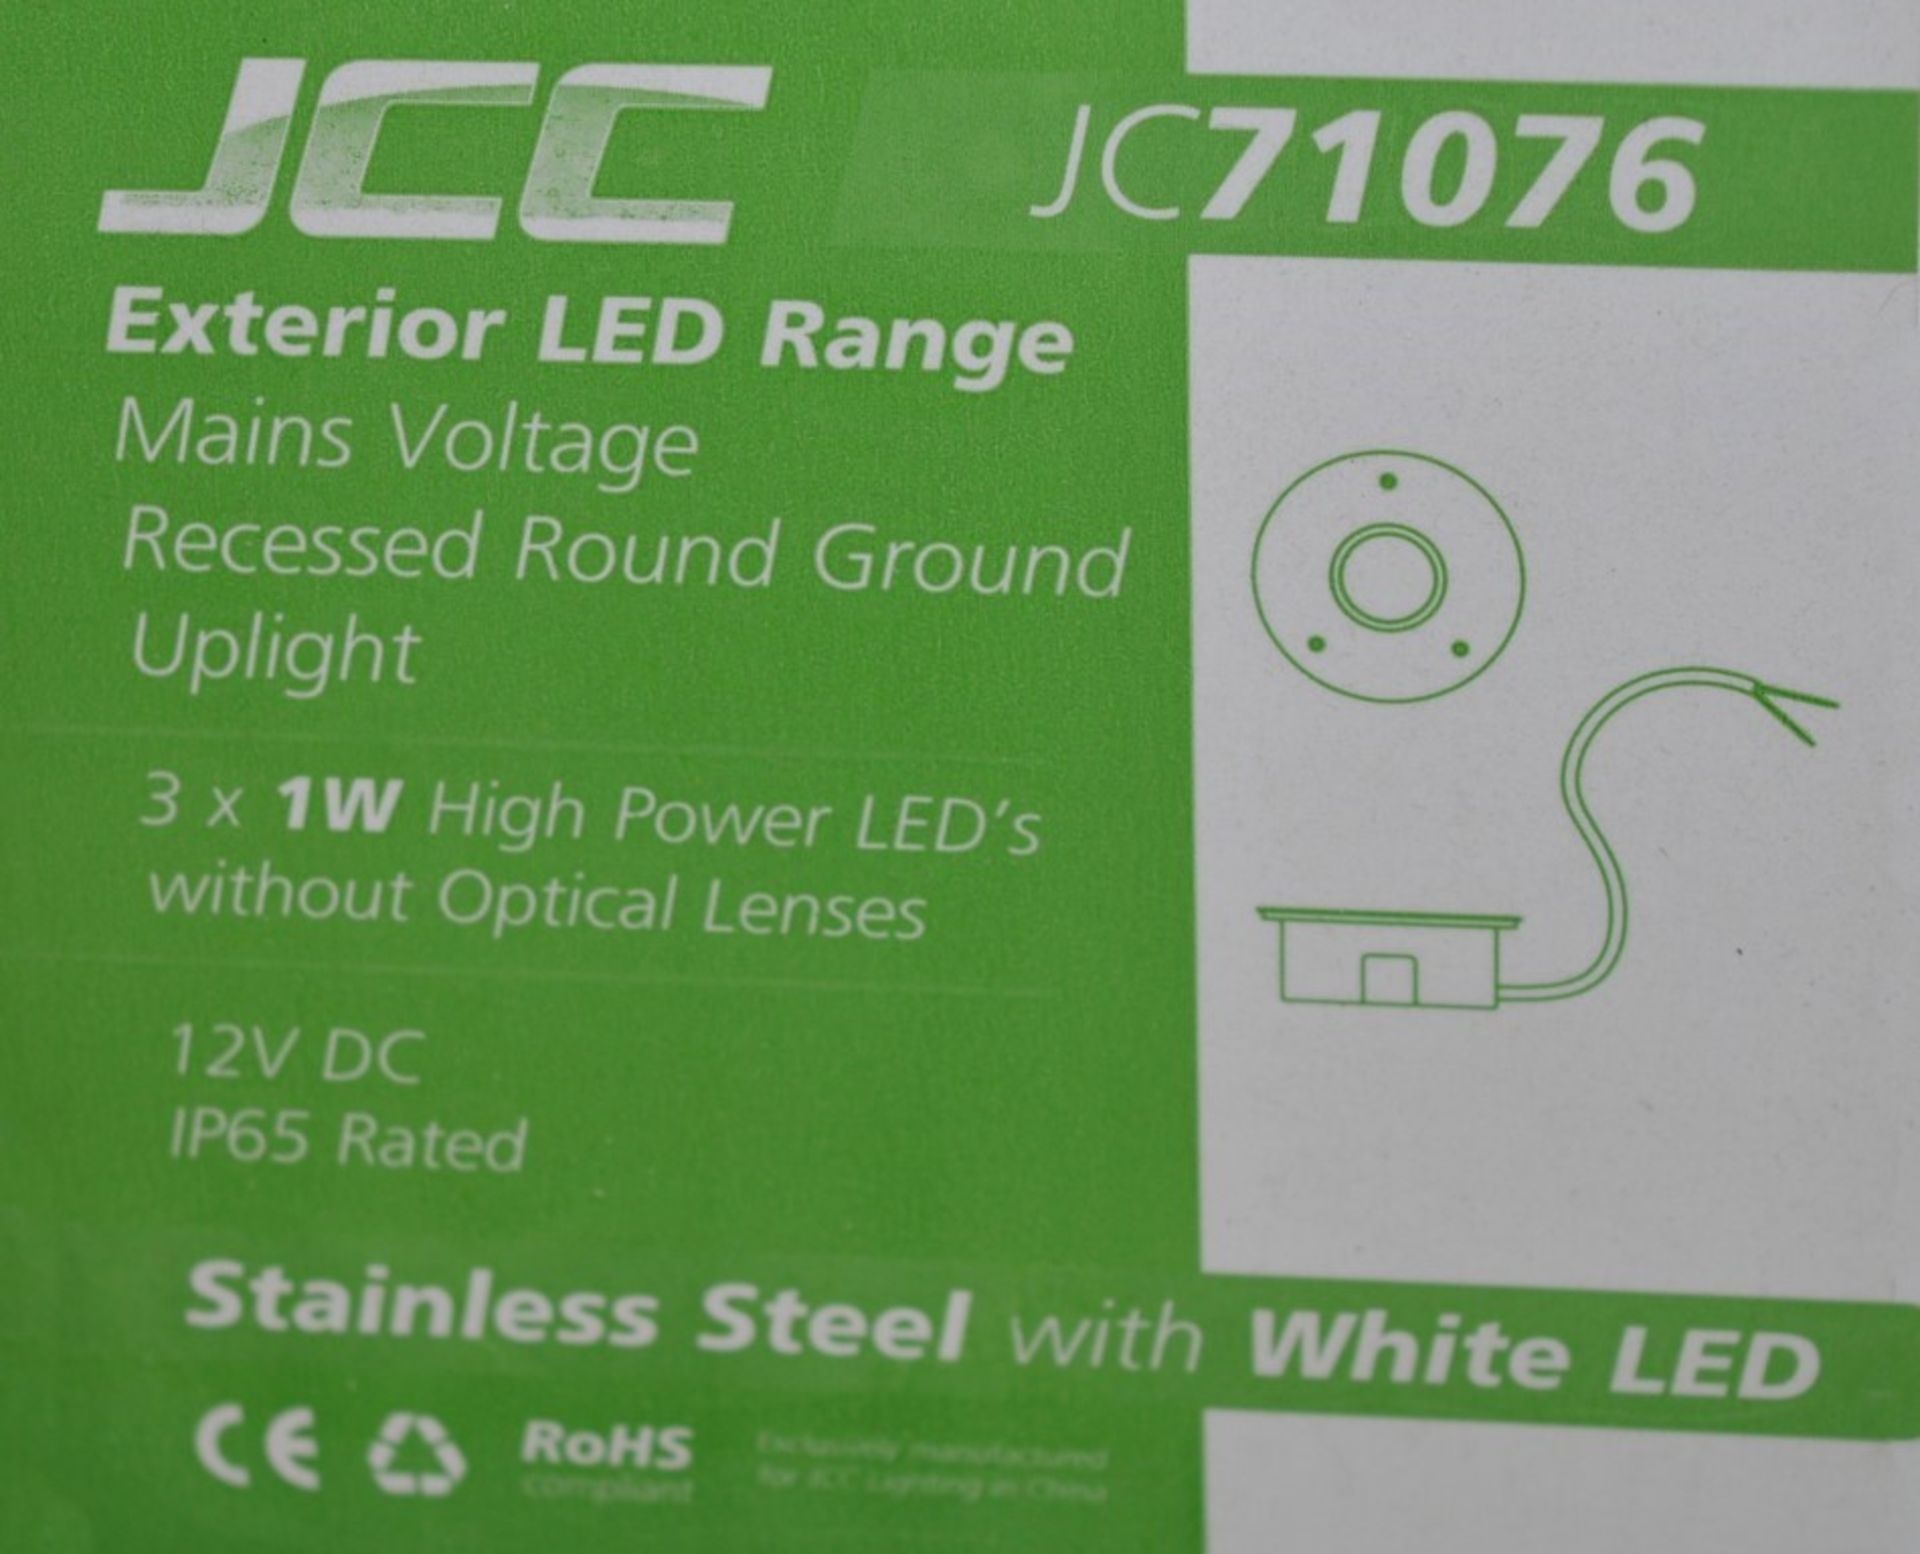 6 x JCC Lighting Exterior LED Mains Voltage Recessed GROUND UPLIGHT Sets - Ideal For Patios or - Image 2 of 5